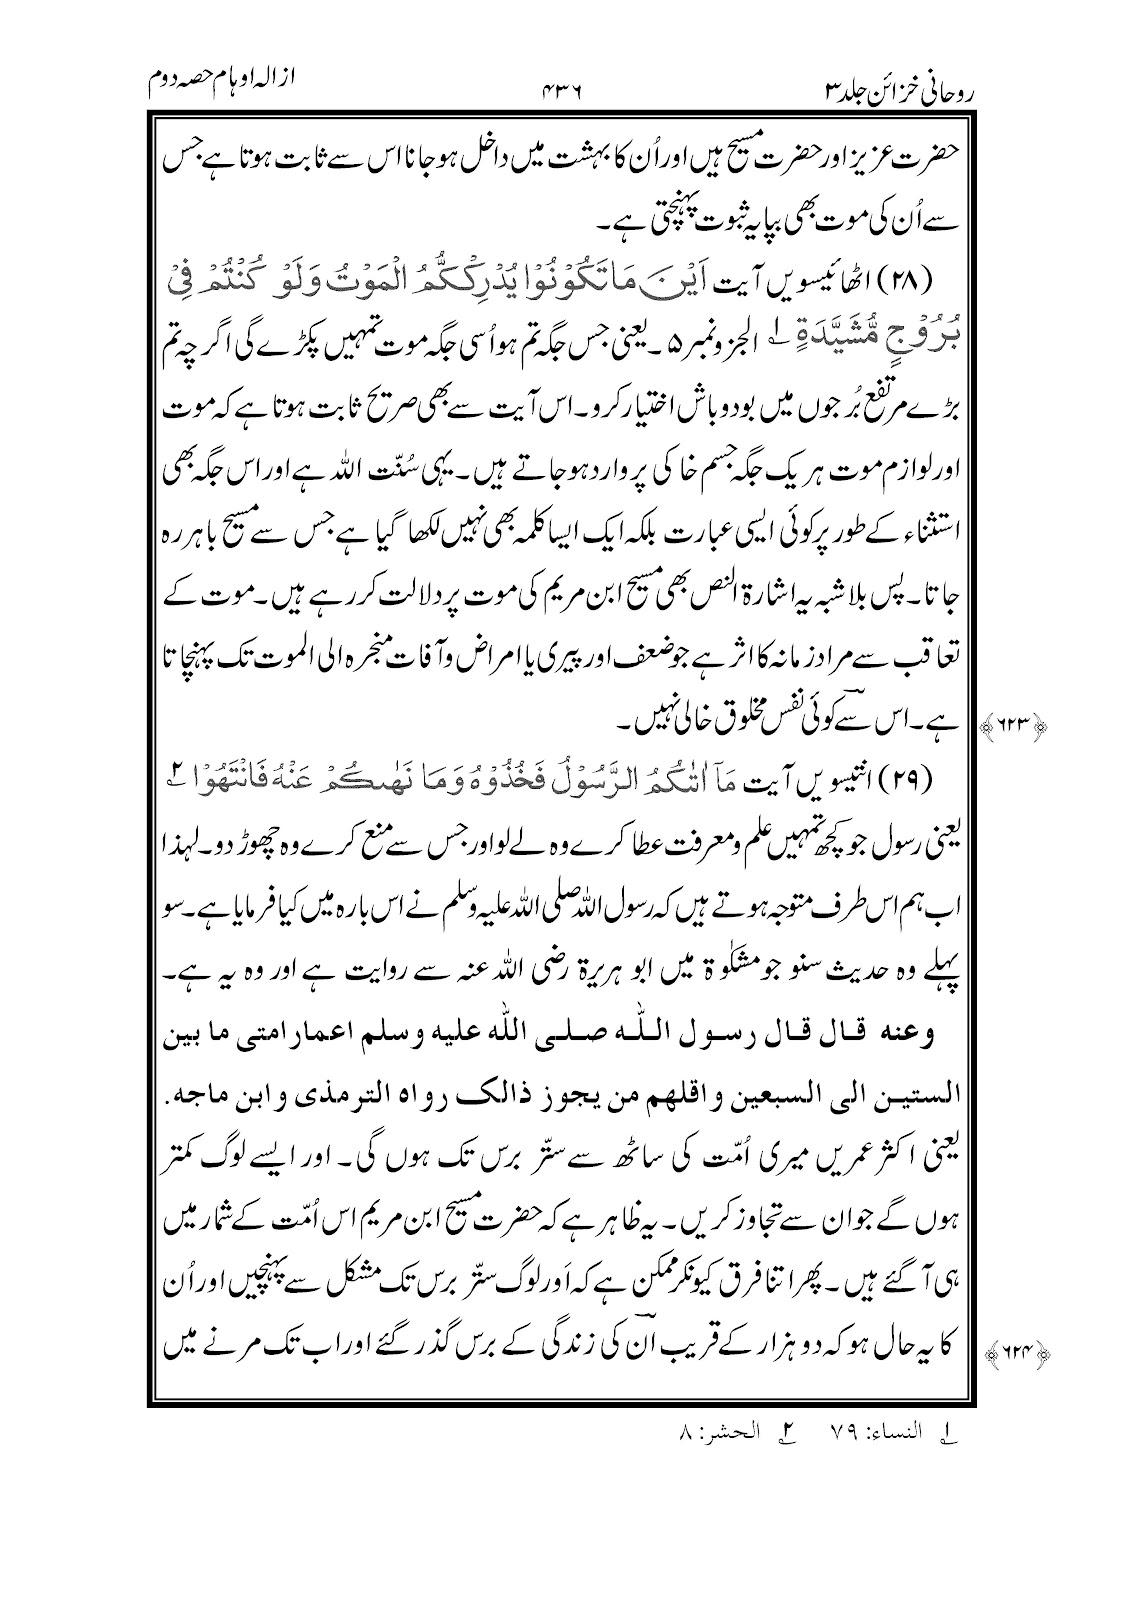 In Urdu : 30 Verses from Holy Quran that proves the death of Isa (as)